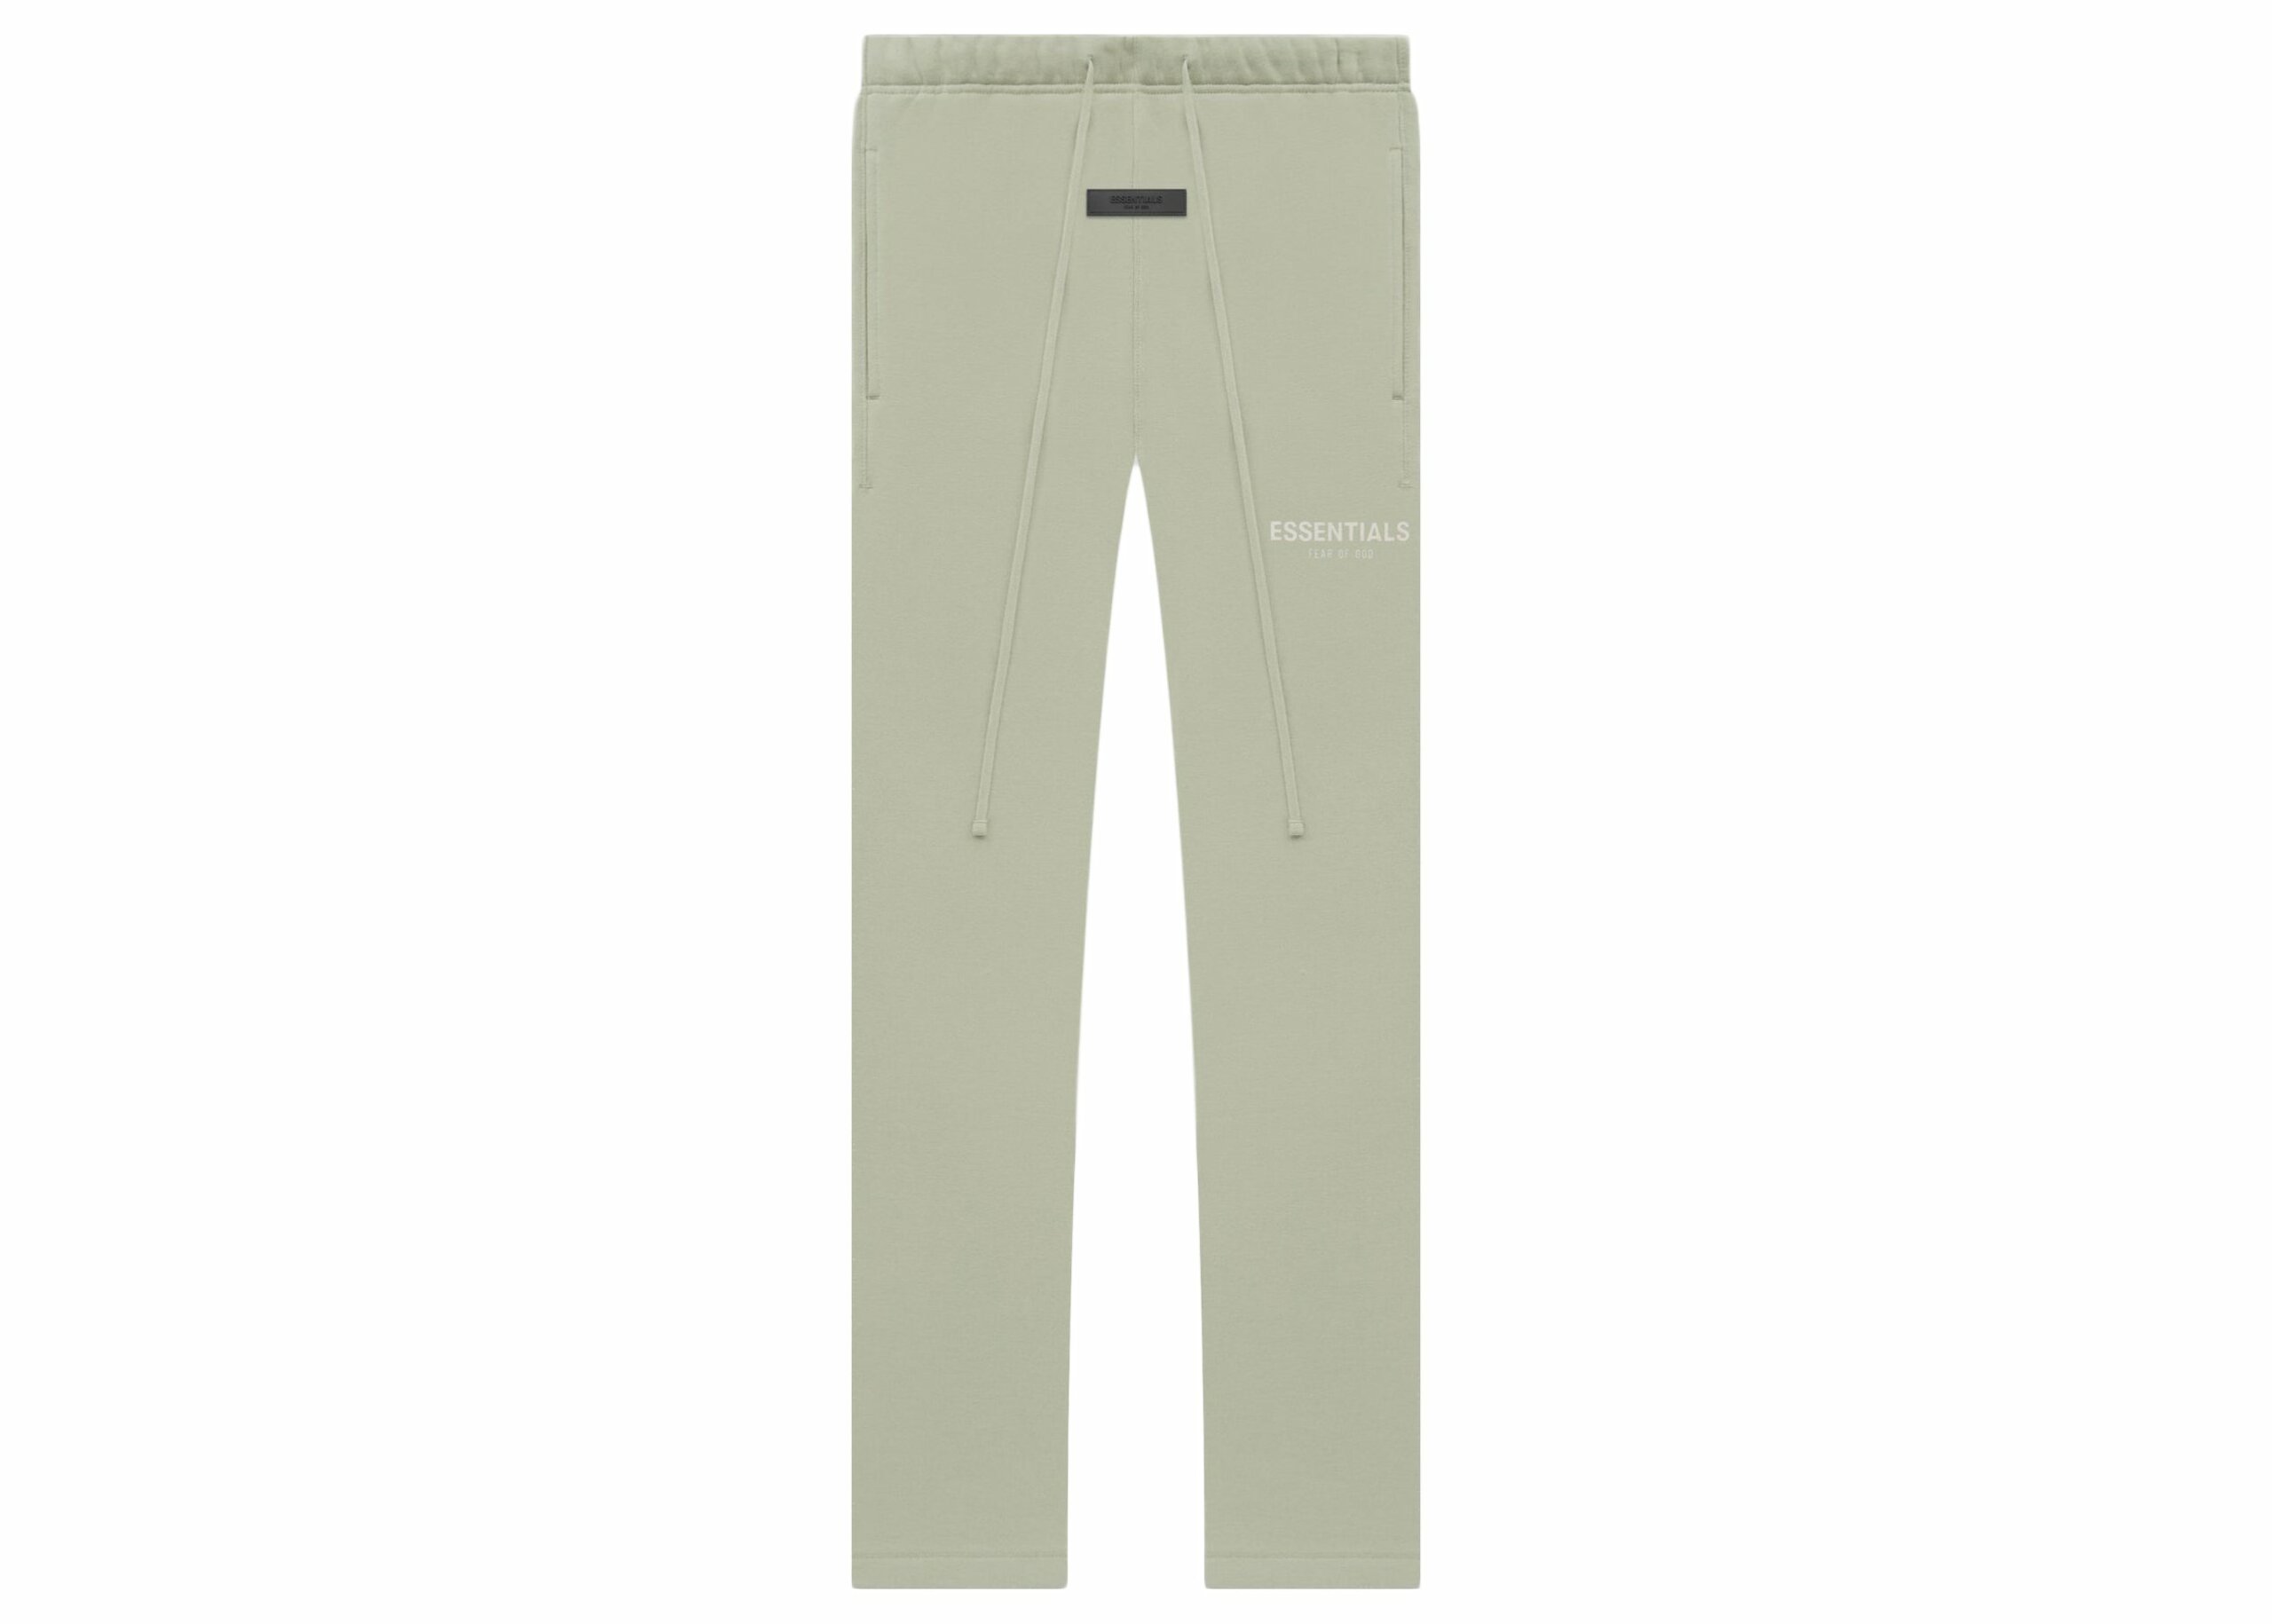 Fear Of God Essentials Relaxed Sweatpants Seafoam - Size: Large